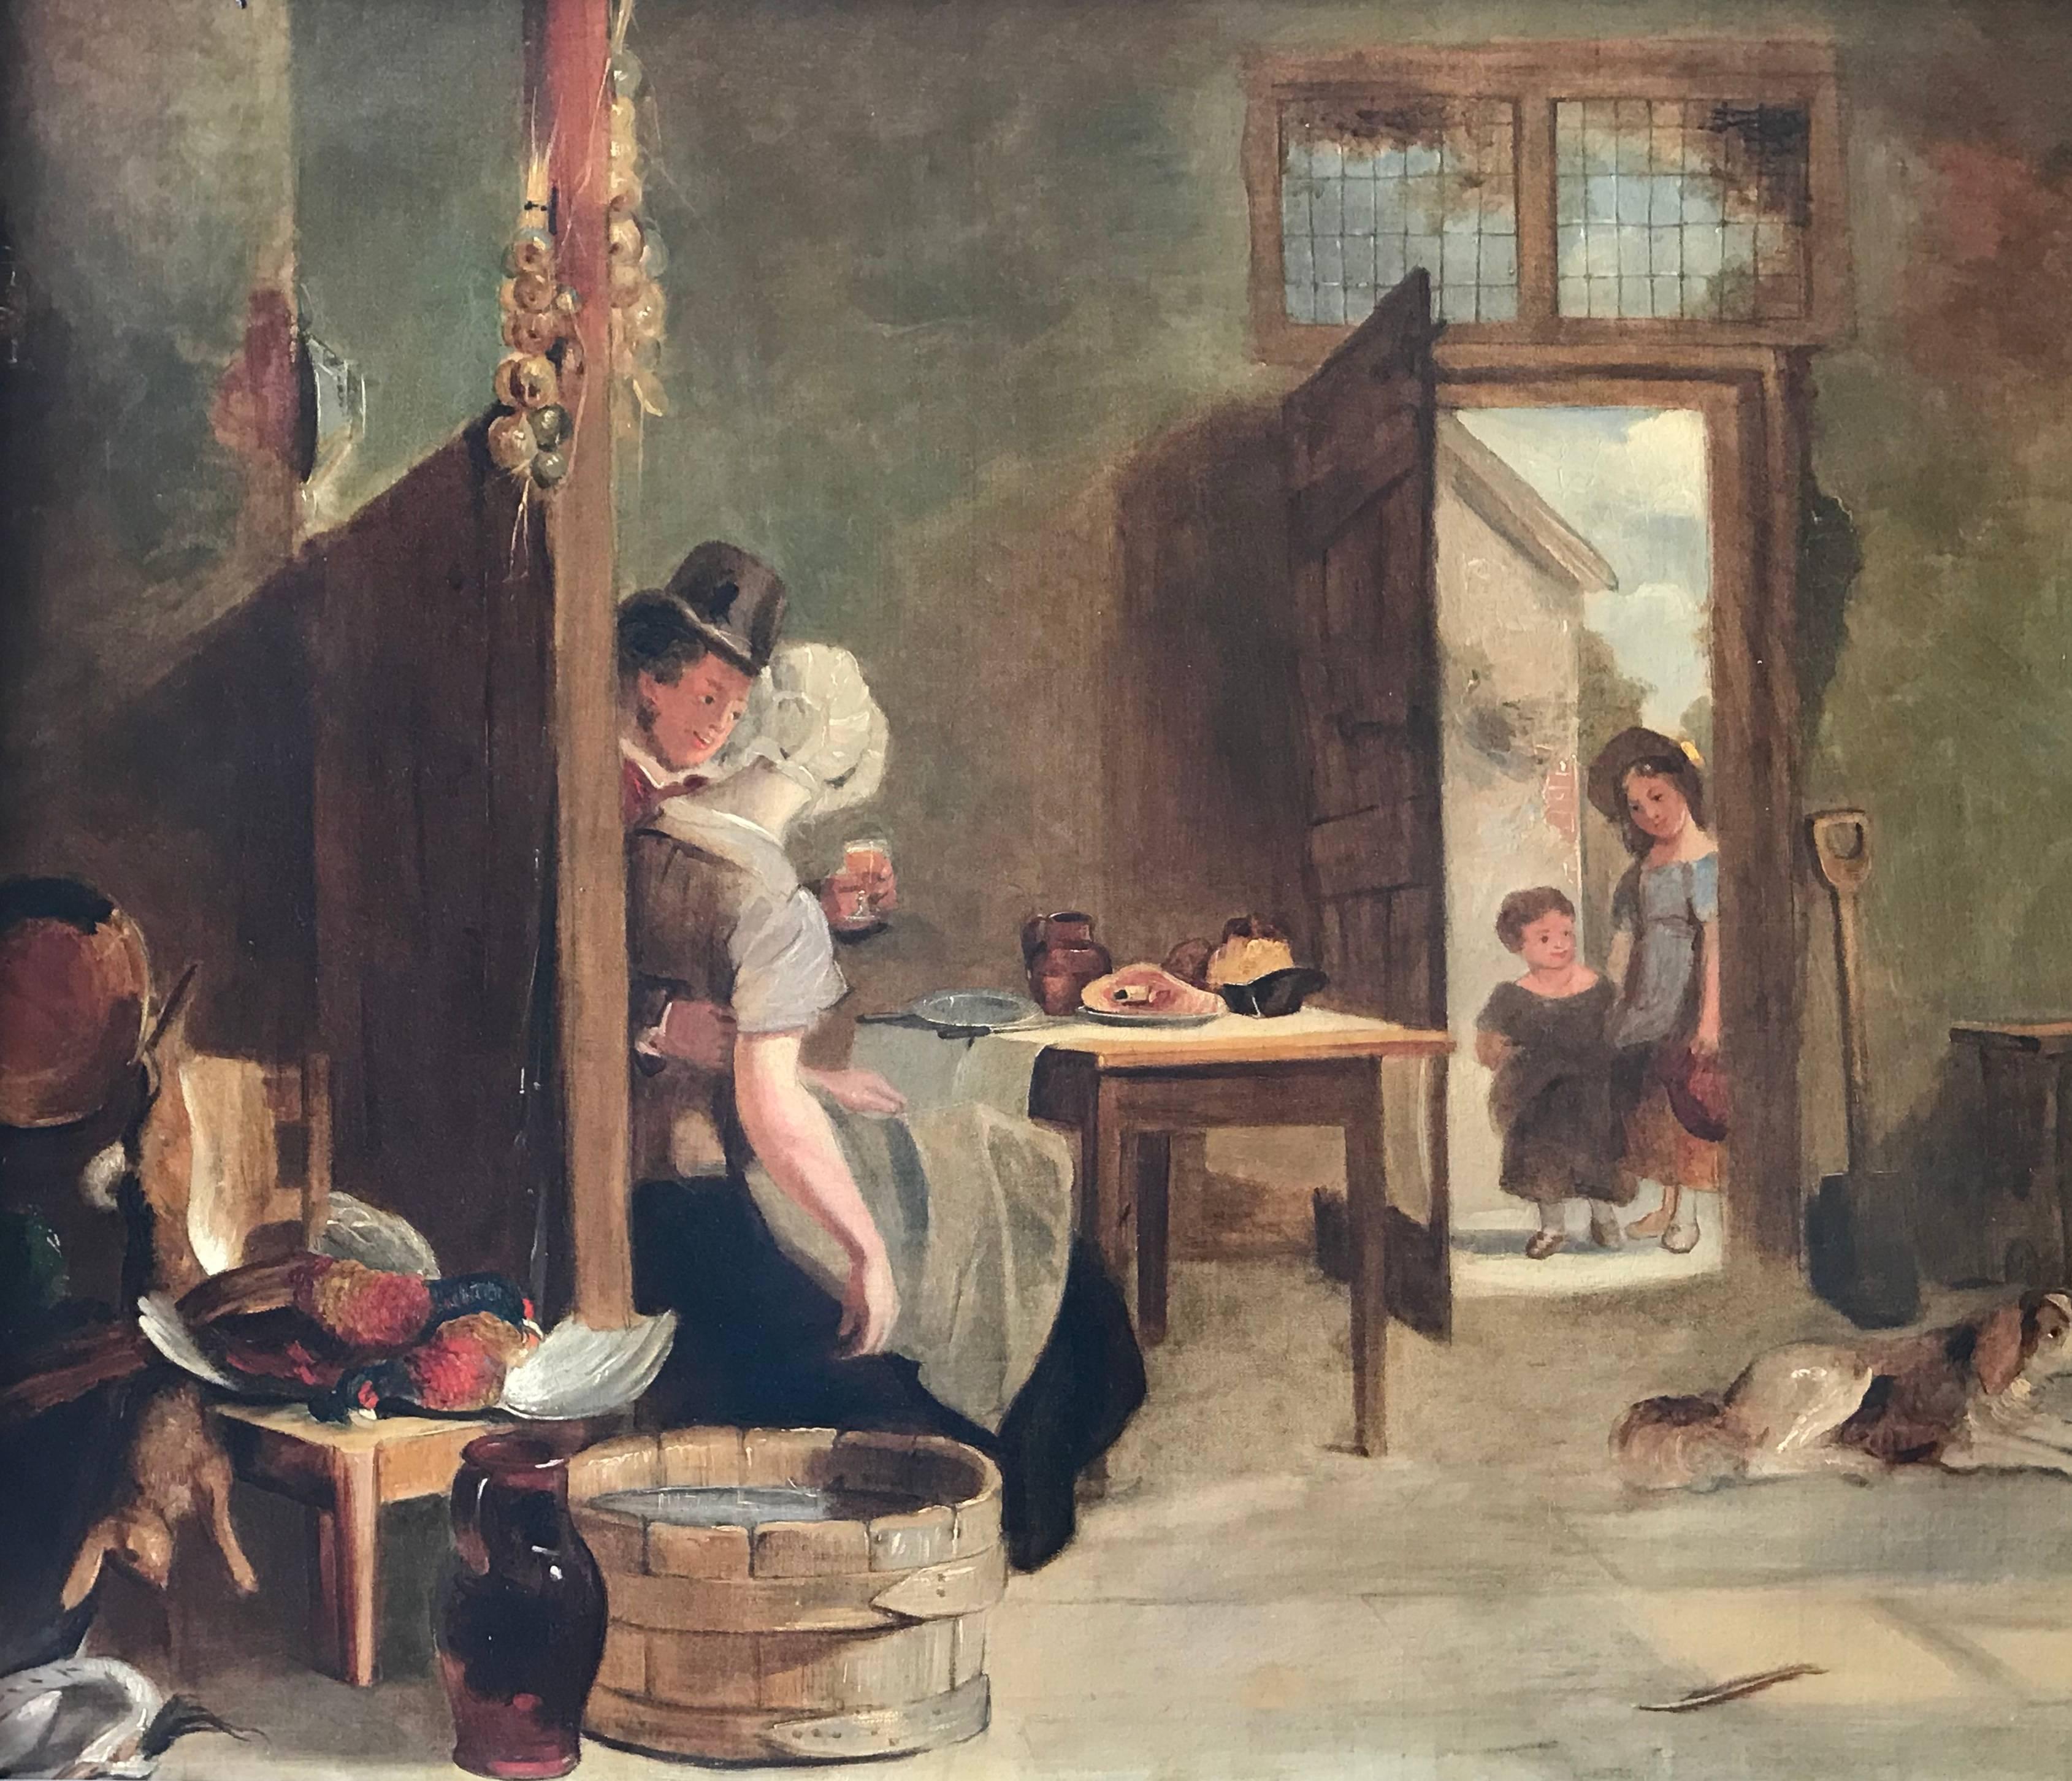 Unknown Figurative Painting - The Country Tavern Interior, 19th century English Oil Painting